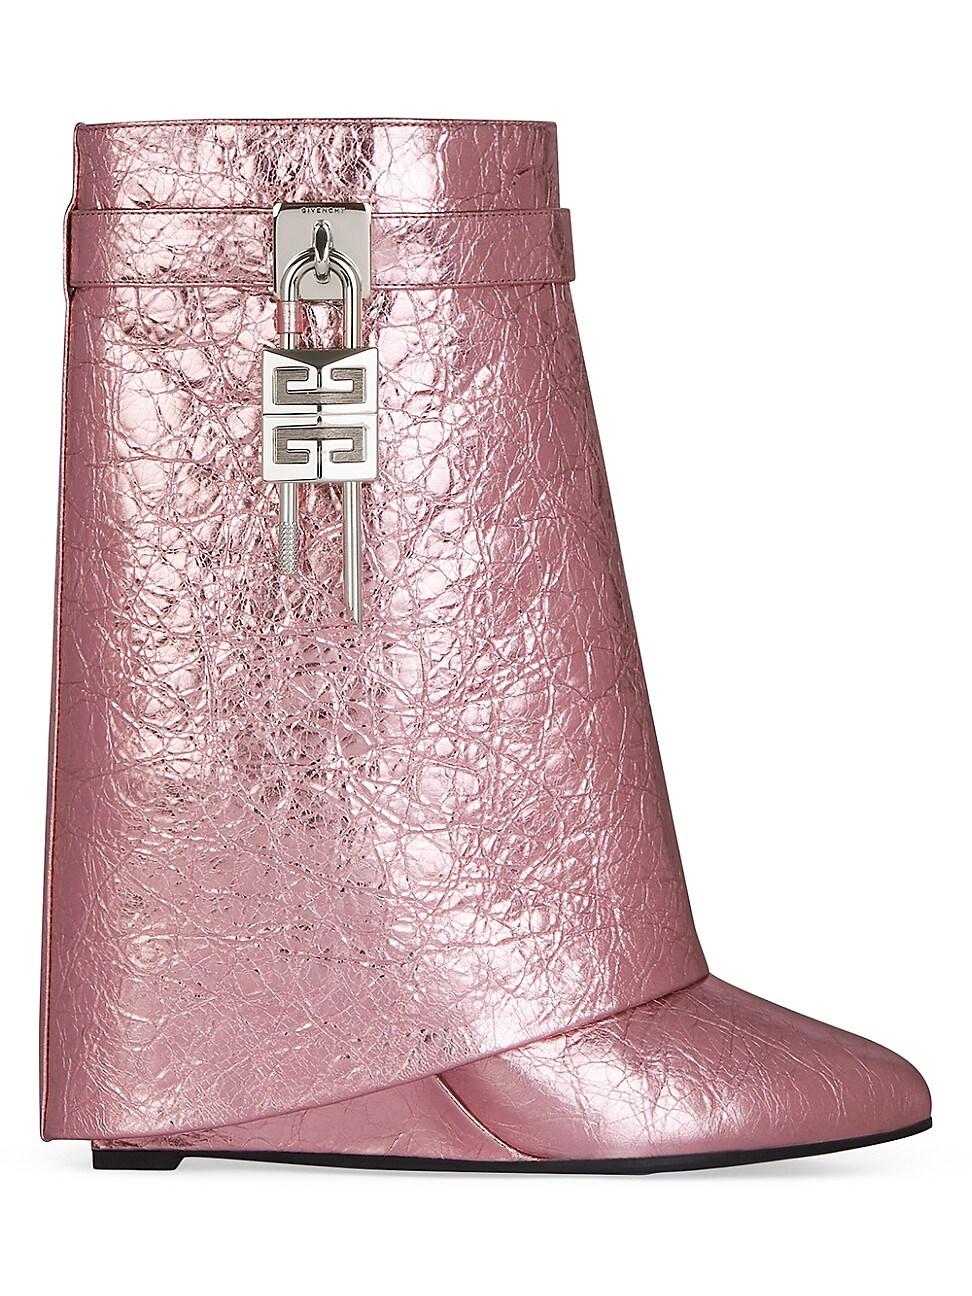 Givenchy Shark Lock Ankle Boots In Laminated Leather in Pink | Lyst